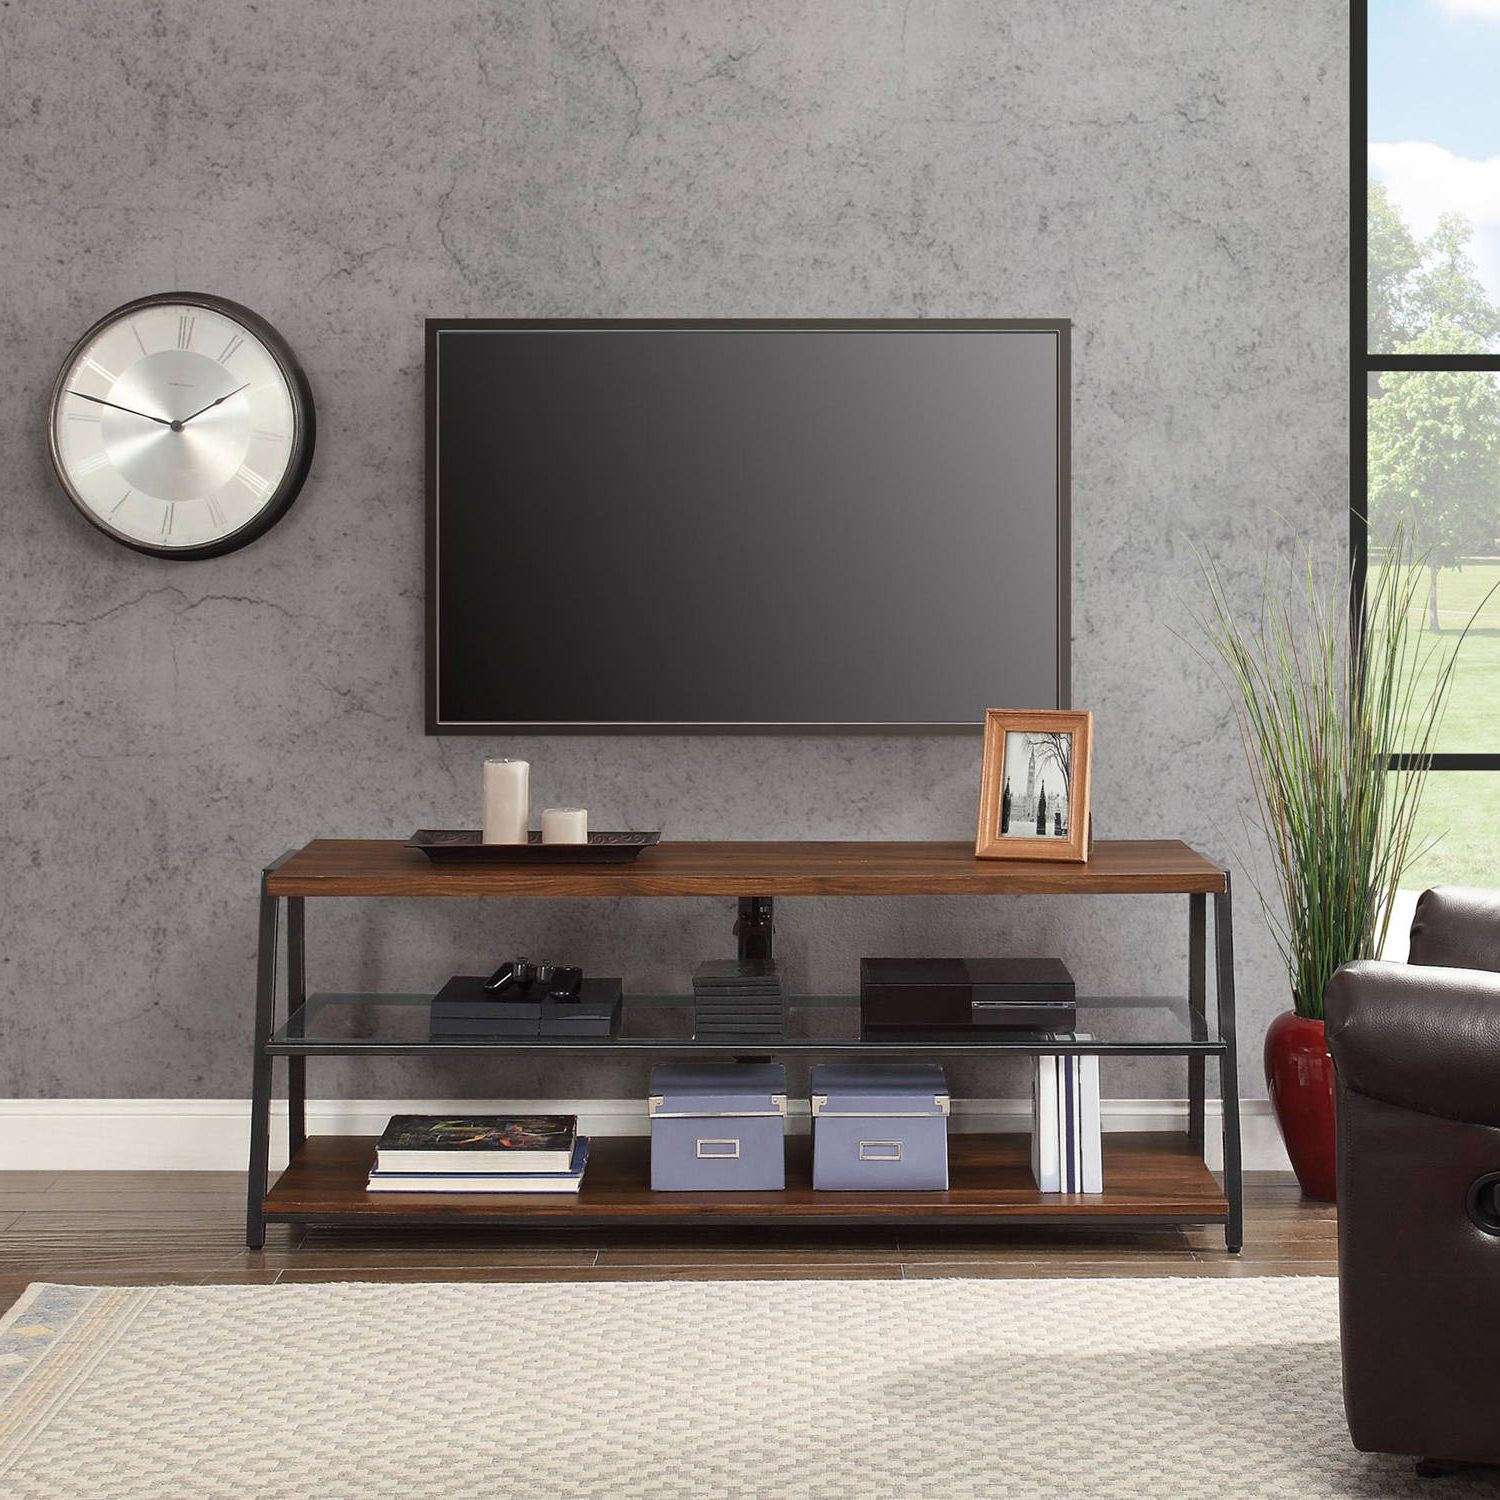 Favorite Mainstays Arris 3 In 1 Tv Stand For Televisions Up To 70 For Mainstays Arris 3 In 1 Tv Stands In Canyon Walnut Finish (Photo 7 of 10)